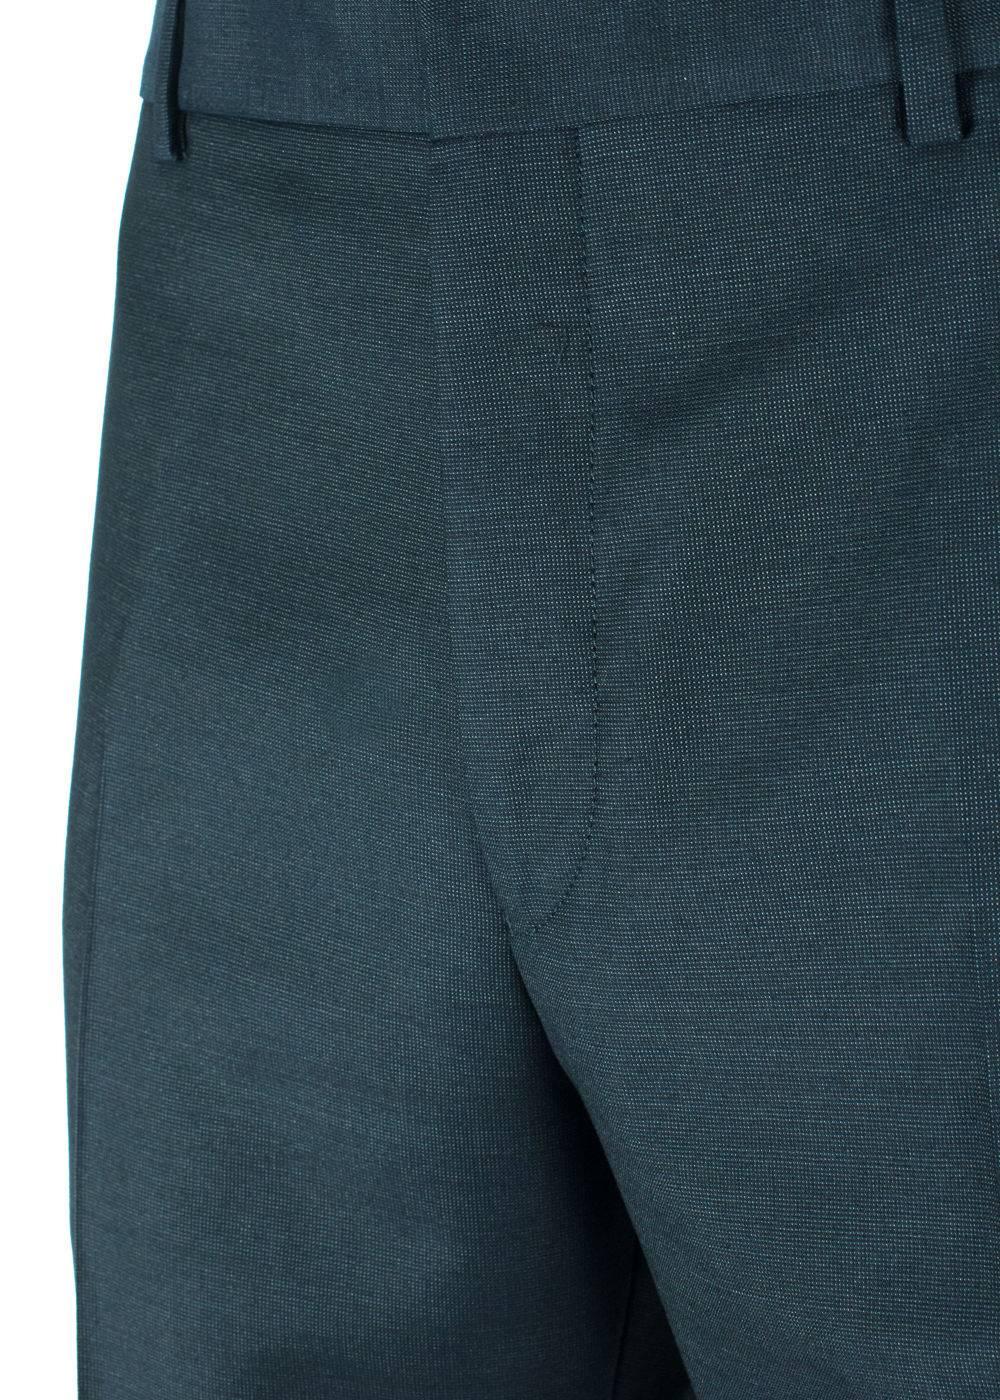 Brand New Givenchy Men's Trousers
Original Tags
Retails in Stores & Online for $480
Men's Size E48 / US32 Fits True to Size

Givenchy's classic black trousers made with wool blend textiles. Super classy and sophisticated for important occasions and